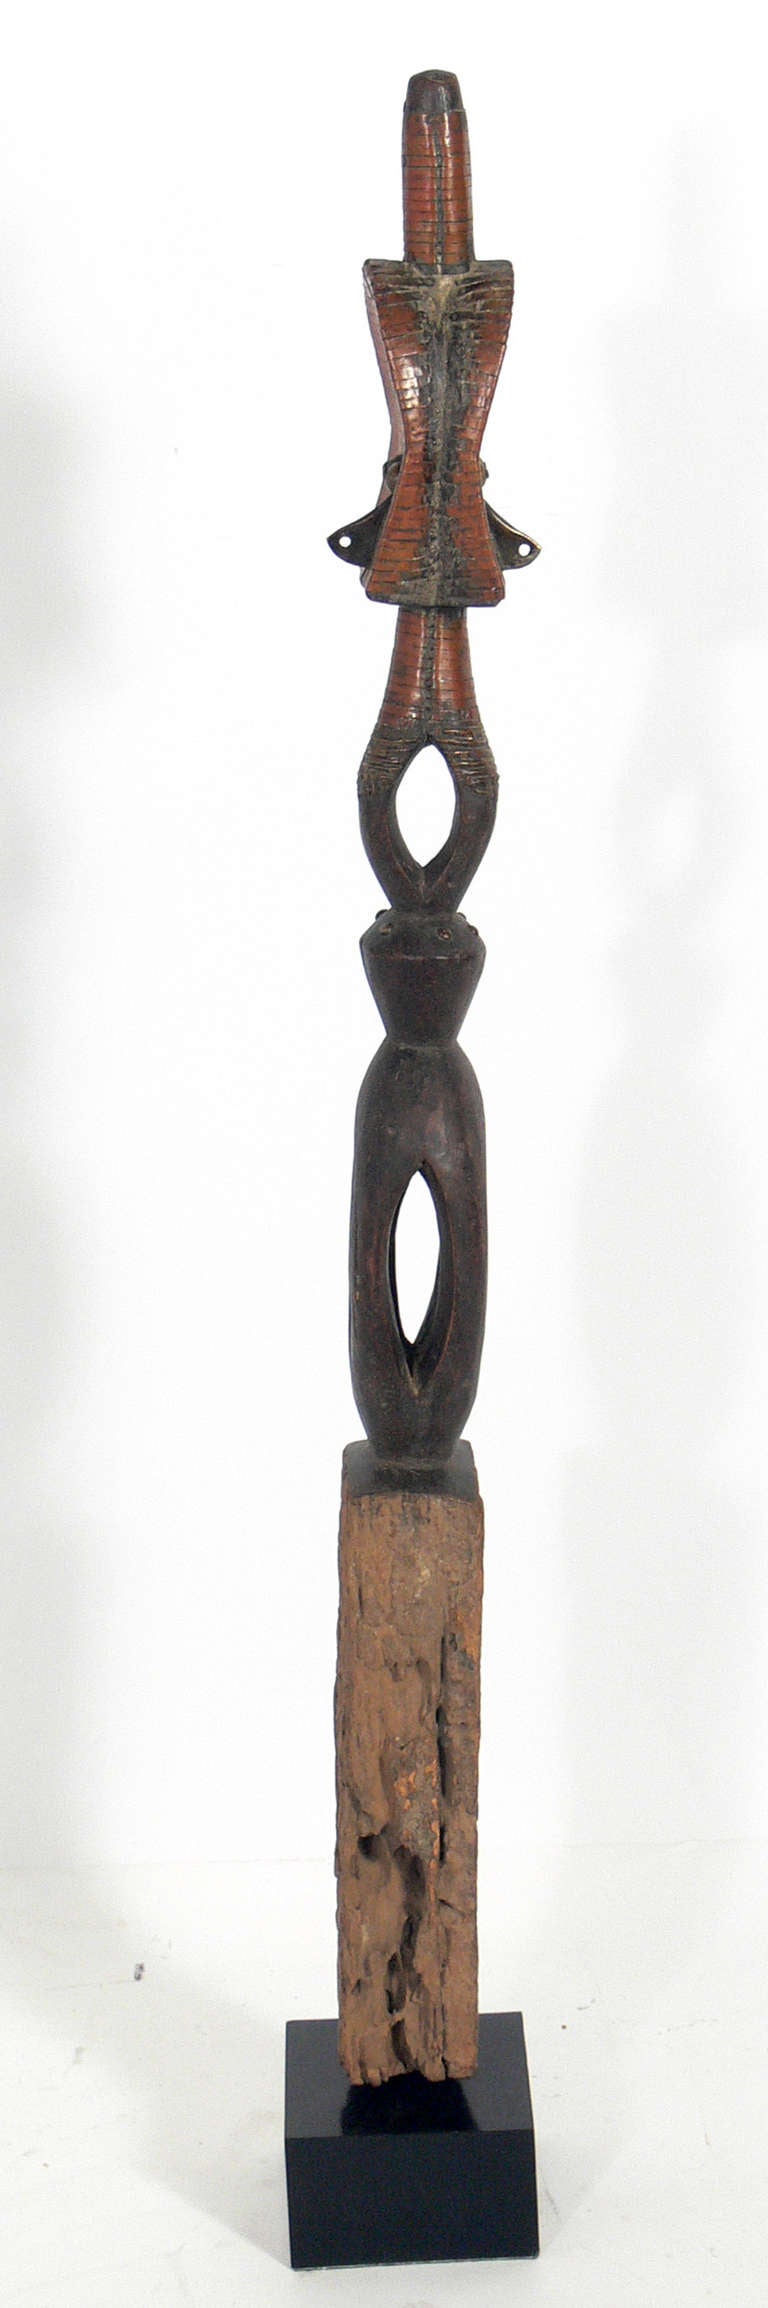 Tribal African Reliquary Sculpture with Modernist Design